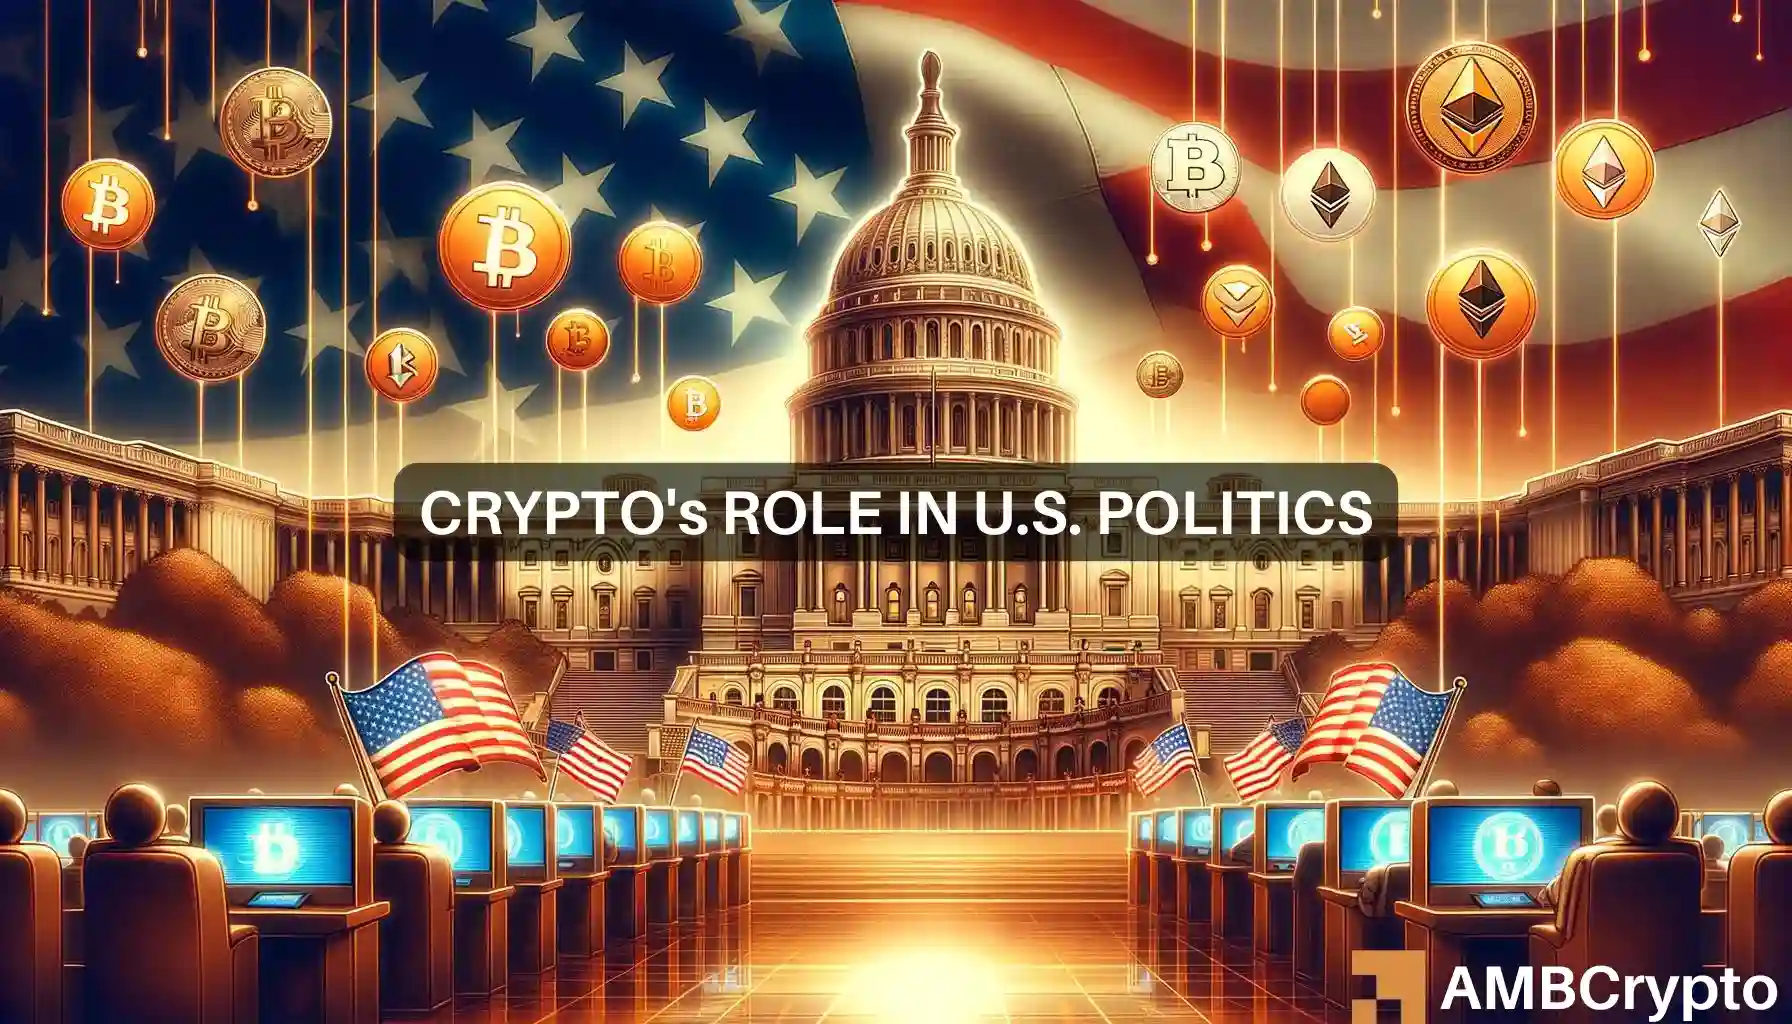 How crypto will play a major role in the 2024 U.S. presidential race